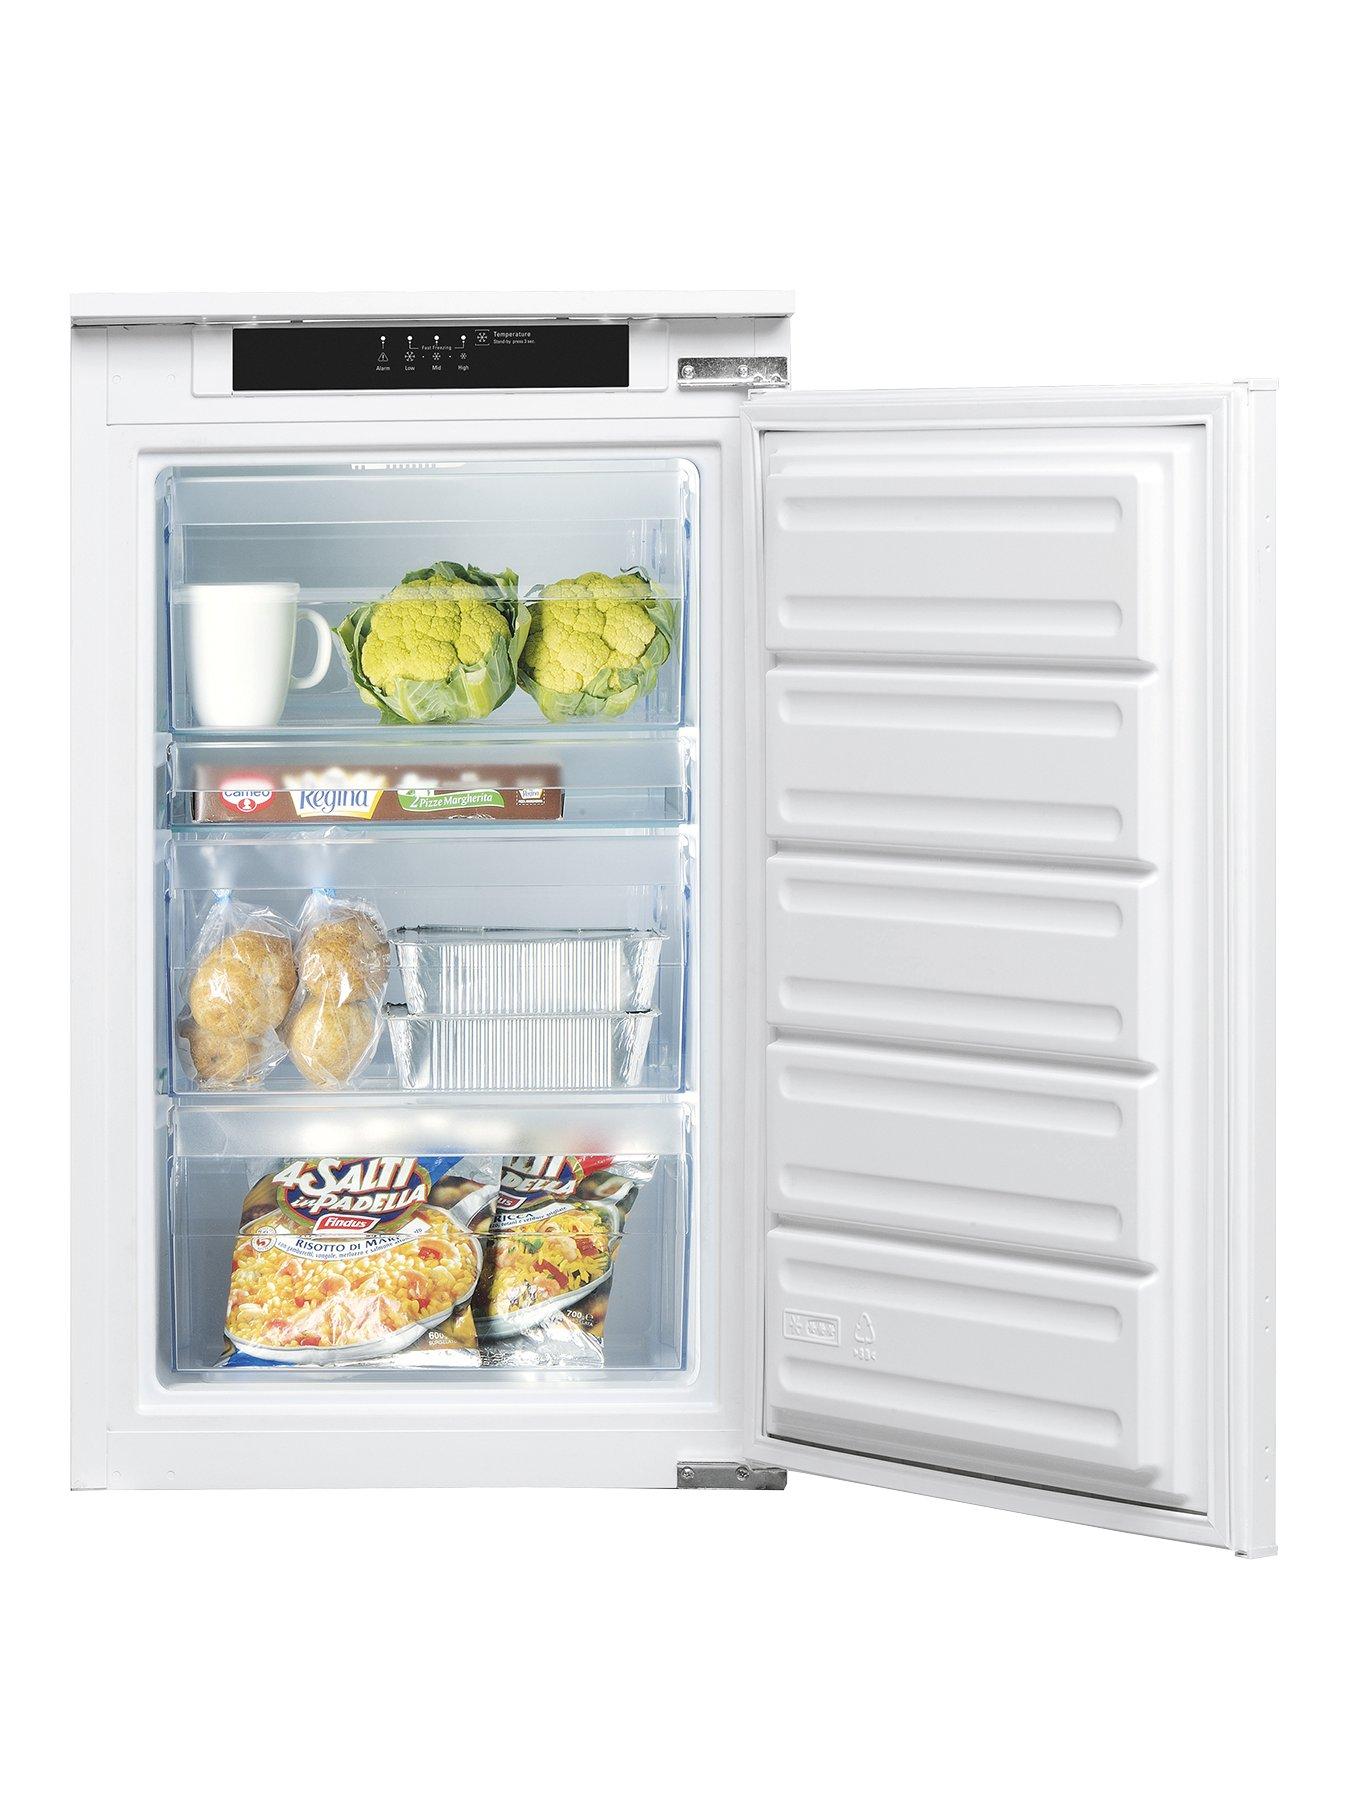 Indesit Inf901Eaa 55Cm Integrated Under Counter Freezer - Freezer Only Review thumbnail